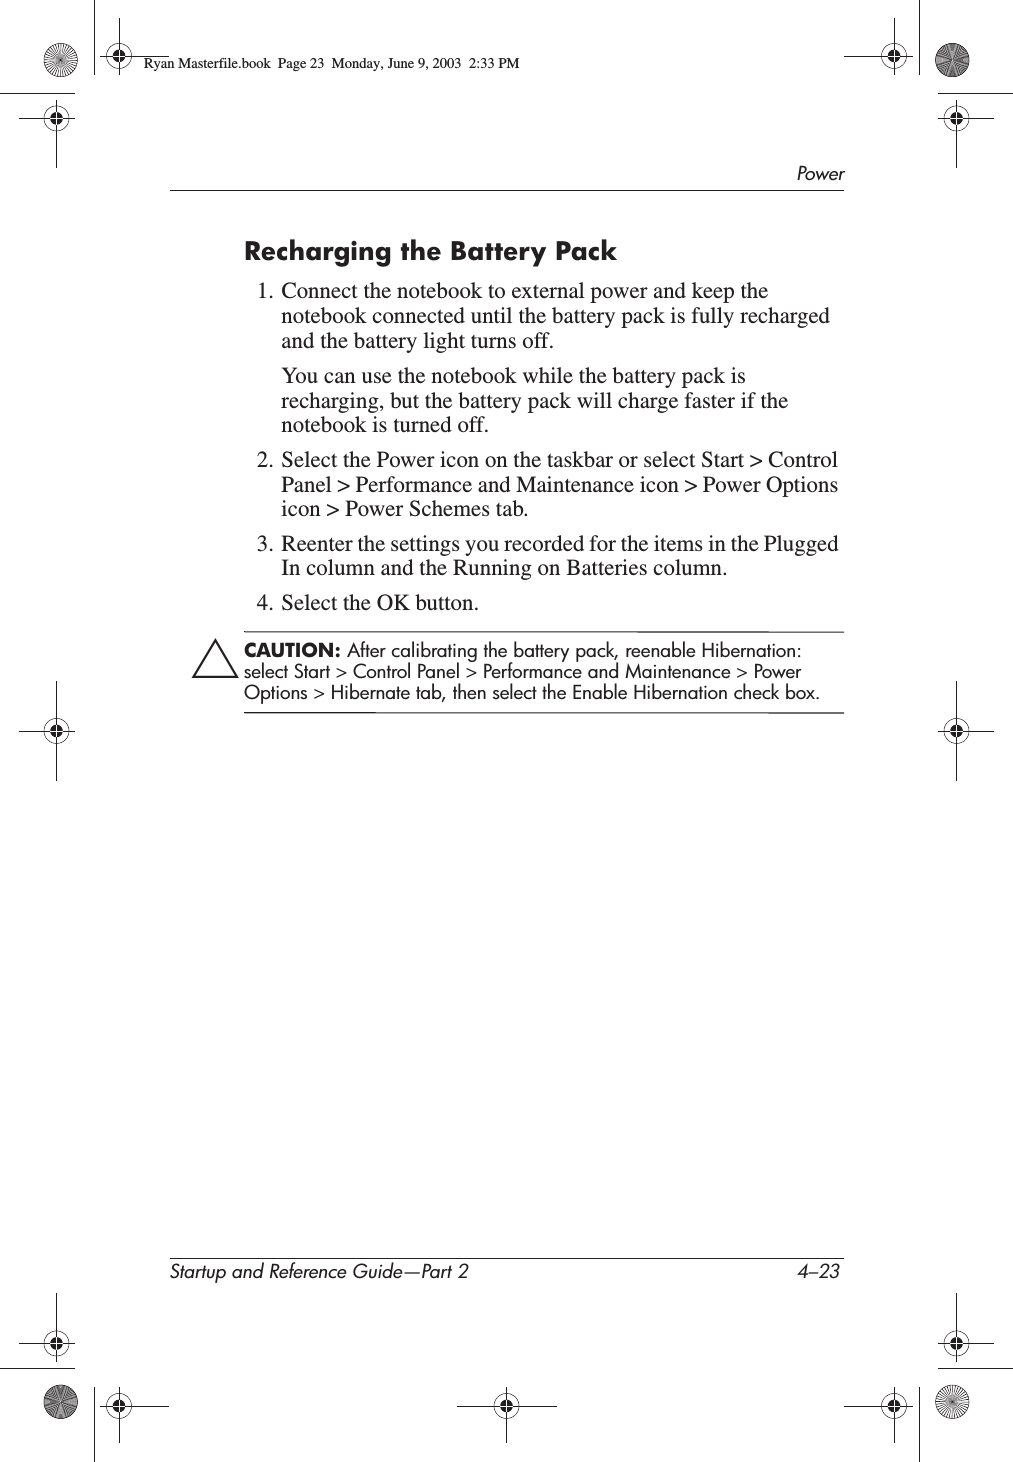 PowerStartup and Reference Guide—Part 2 4–23Recharging the Battery Pack1. Connect the notebook to external power and keep the notebook connected until the battery pack is fully recharged and the battery light turns off. You can use the notebook while the battery pack is recharging, but the battery pack will charge faster if the notebook is turned off.2. Select the Power icon on the taskbar or select Start &gt; Control Panel &gt; Performance and Maintenance icon &gt; Power Options icon &gt; Power Schemes tab.3. Reenter the settings you recorded for the items in the Plugged In column and the Running on Batteries column.4. Select the OK button.ÄCAUTION: After calibrating the battery pack, reenable Hibernation: select Start &gt; Control Panel &gt; Performance and Maintenance &gt; Power Options &gt; Hibernate tab, then select the Enable Hibernation check box.Ryan Masterfile.book  Page 23  Monday, June 9, 2003  2:33 PM